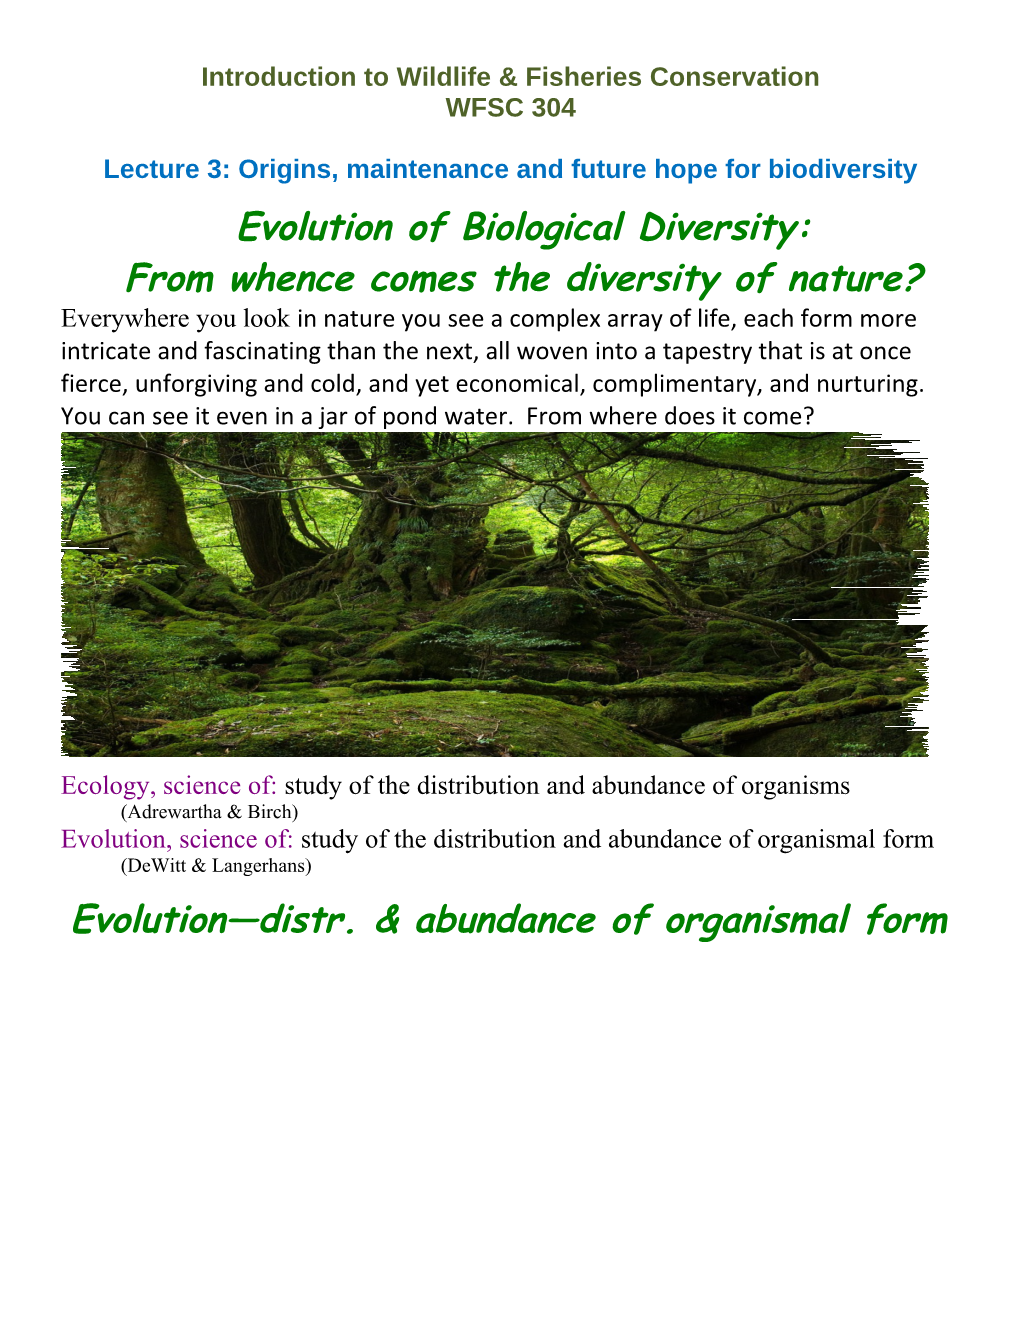 BESC 201, Introduction to Bioenvironmental Science